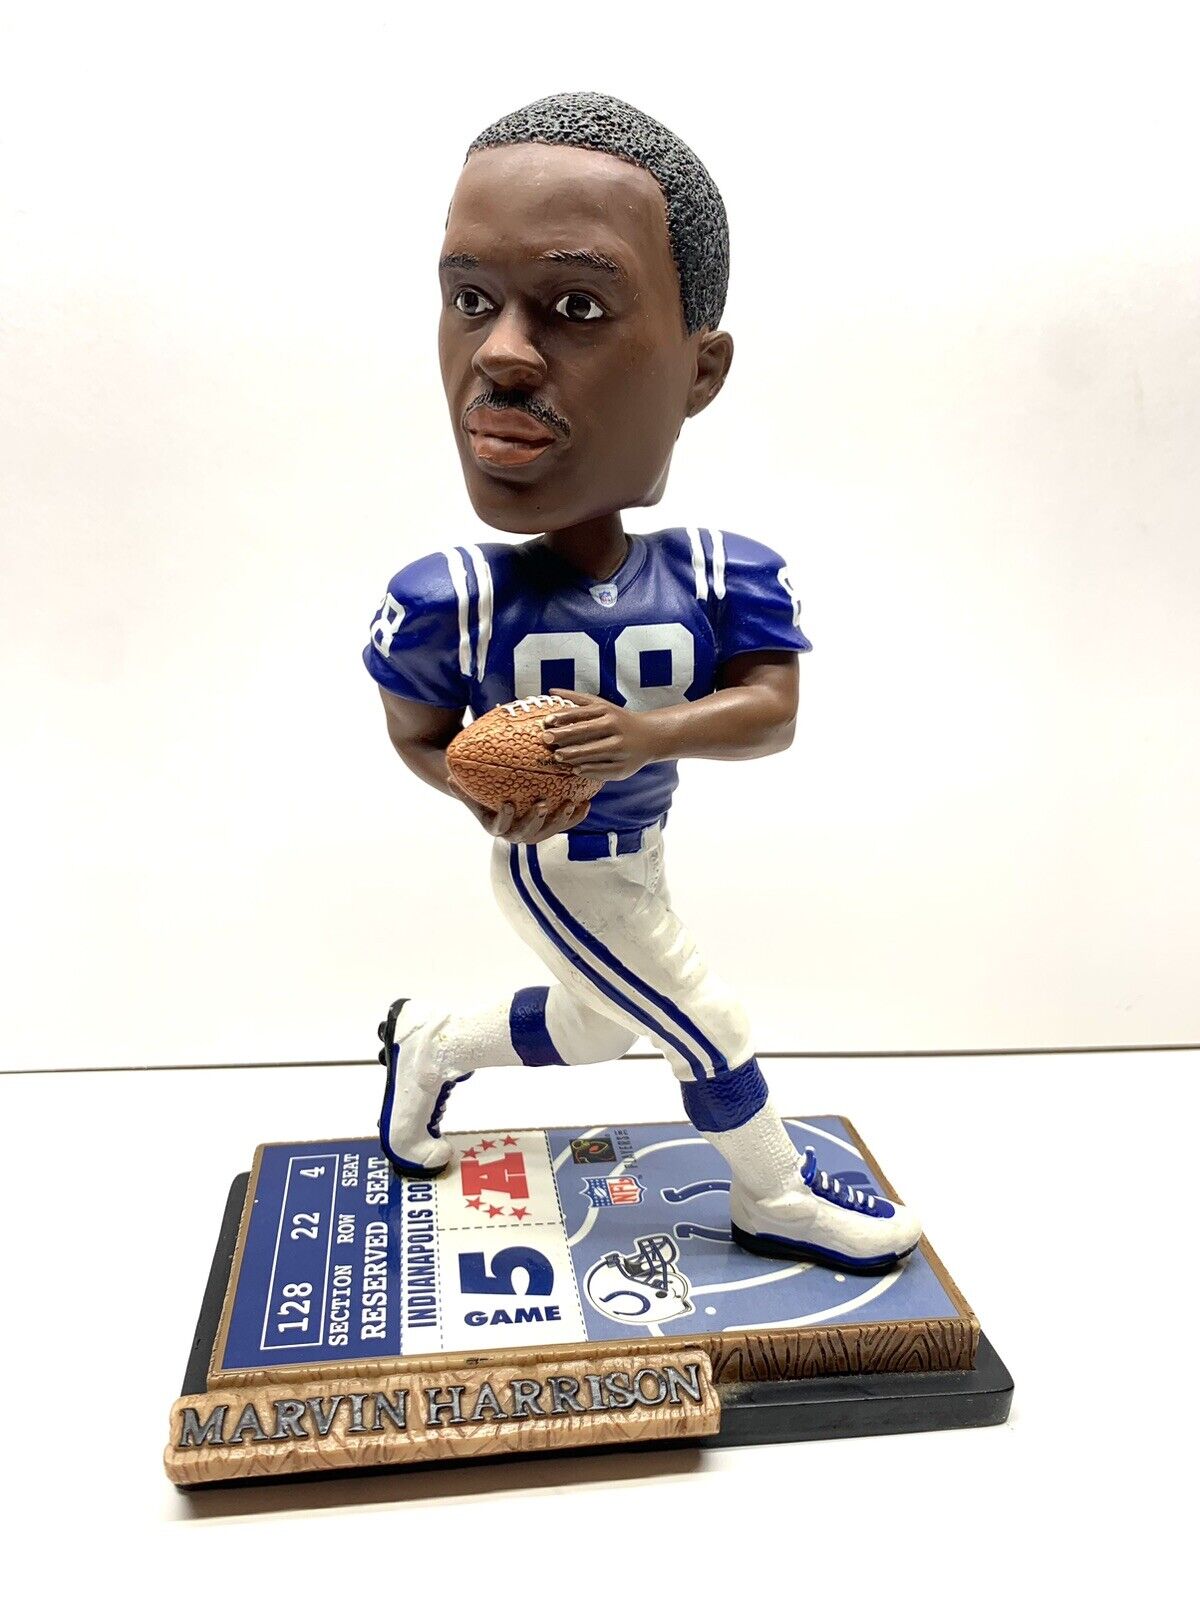 INDIANAPOLIS COLTS MARVIN HARRISON #88 NFL TICKET BASE BOBBLEHEAD 649/5004